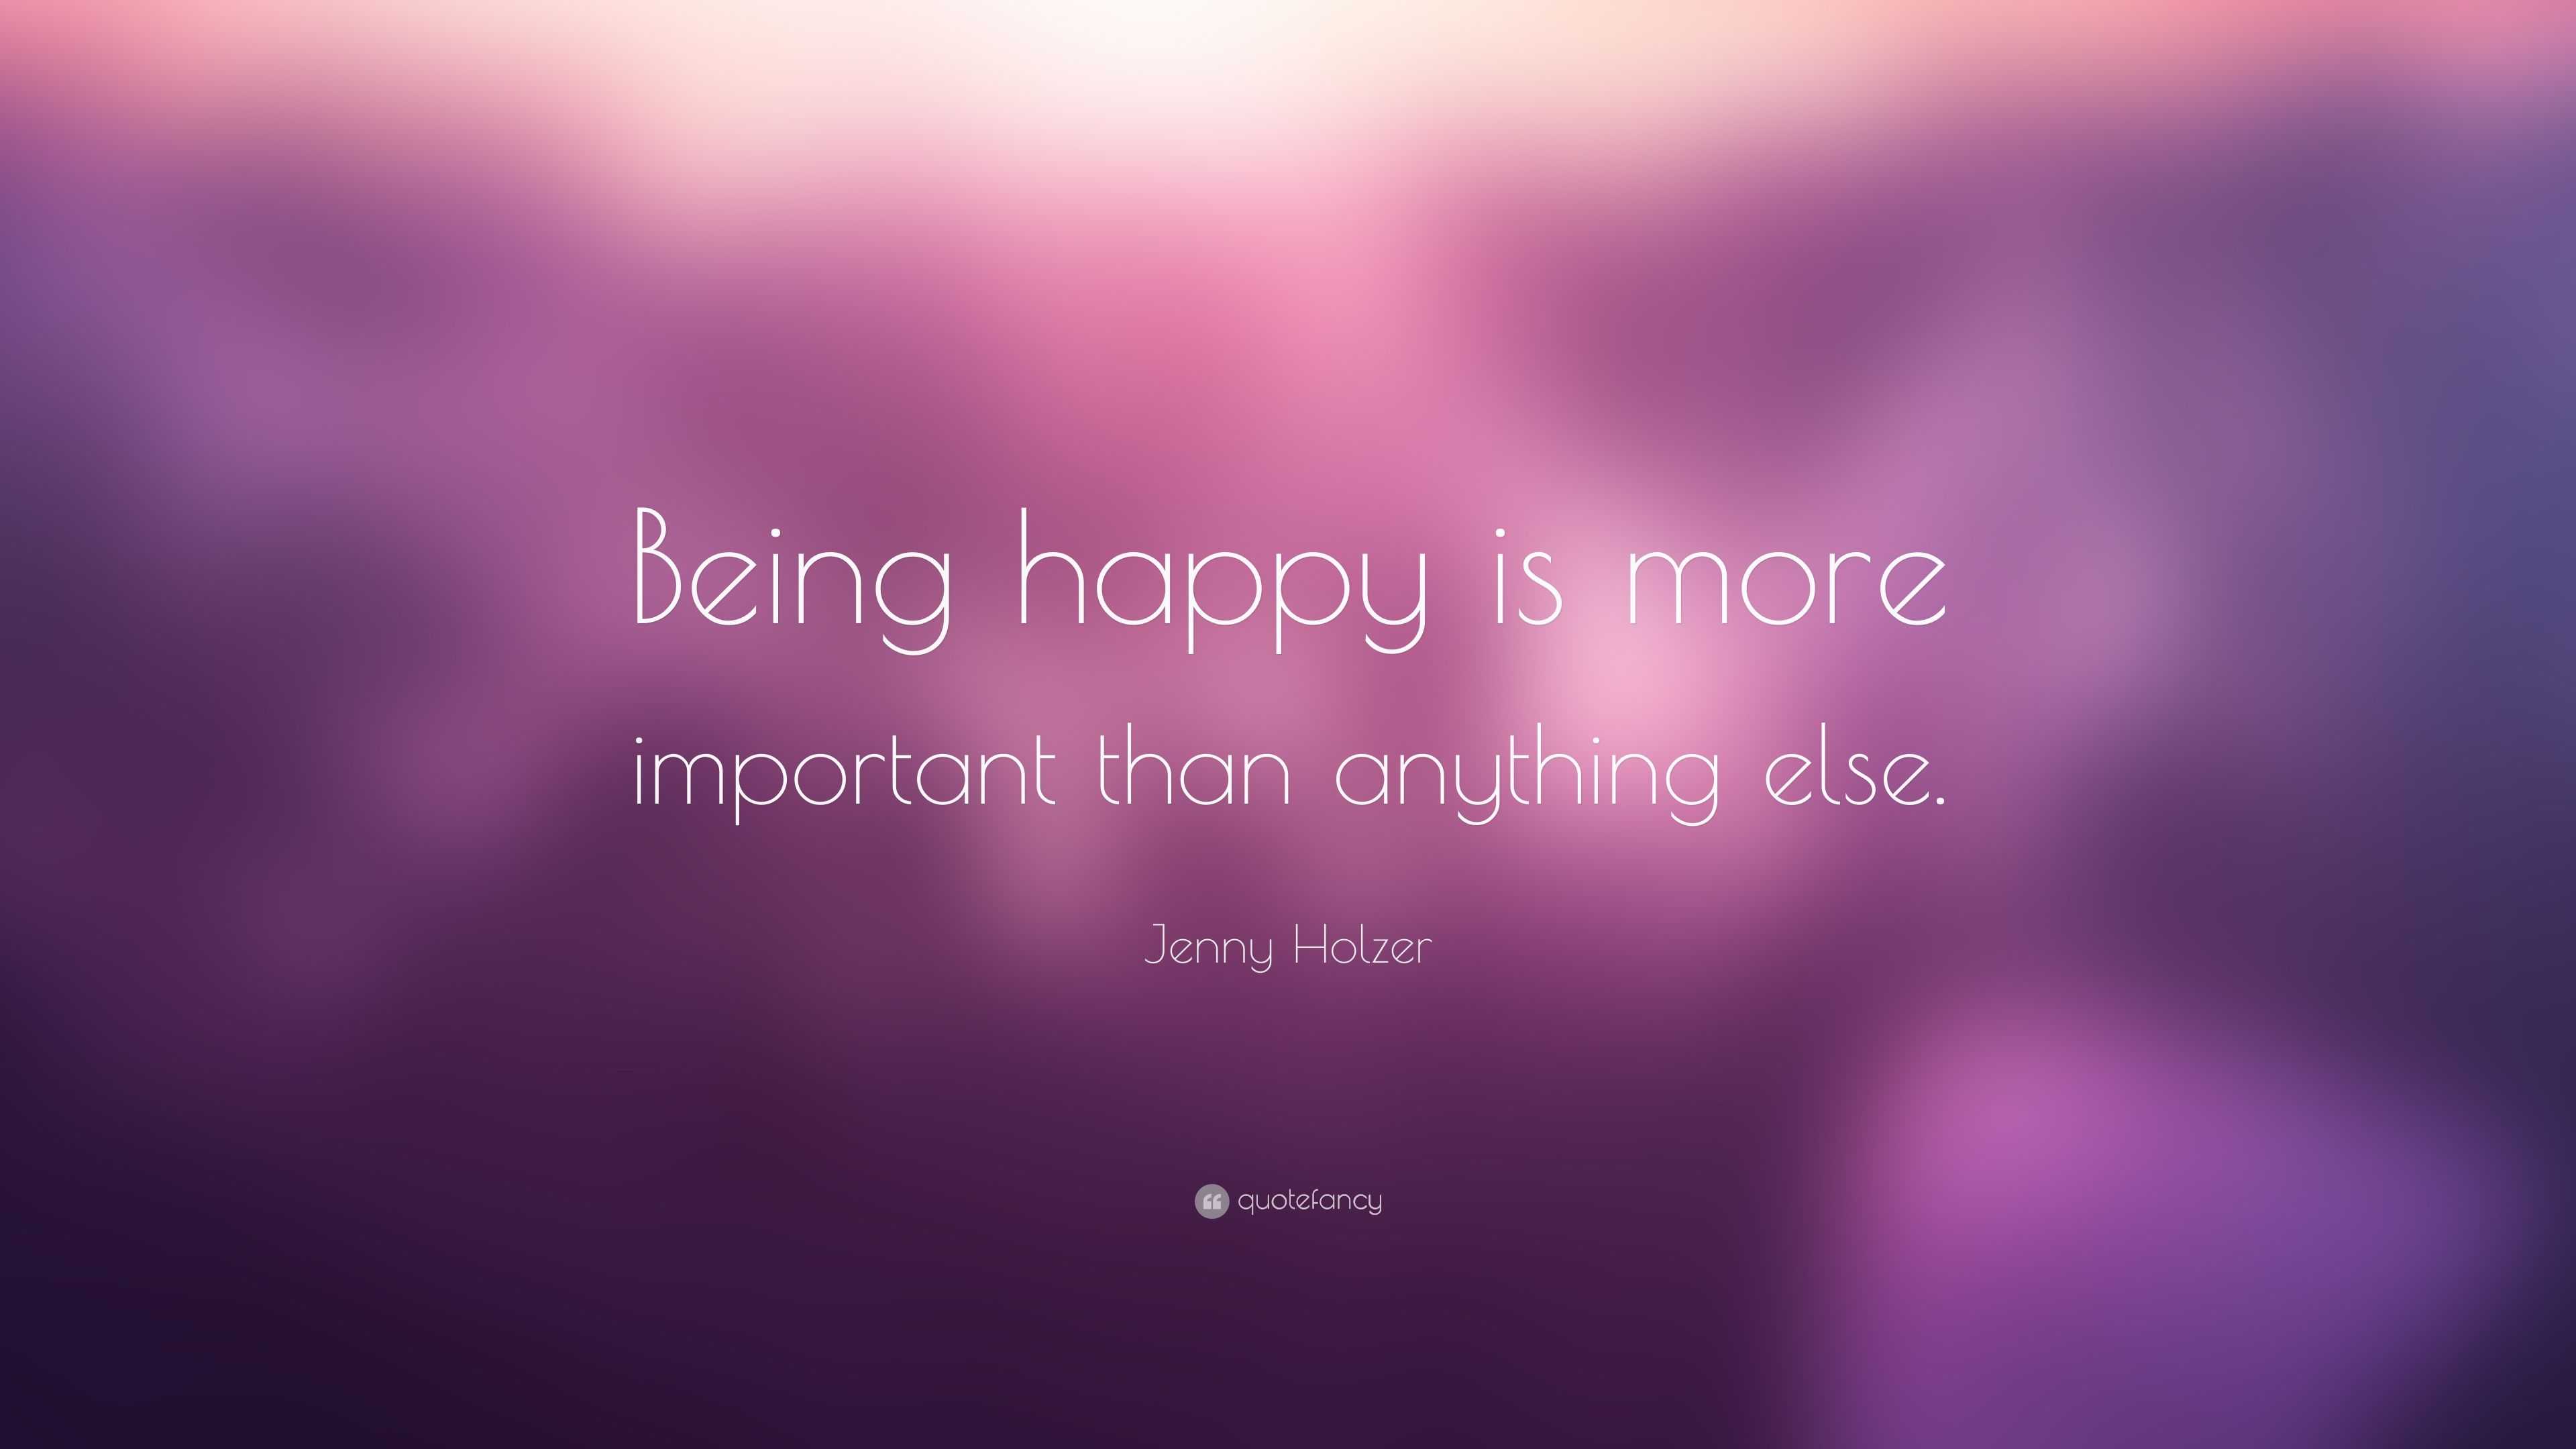 Jenny Holzer Quote: “Being happy is more important than anything else.”